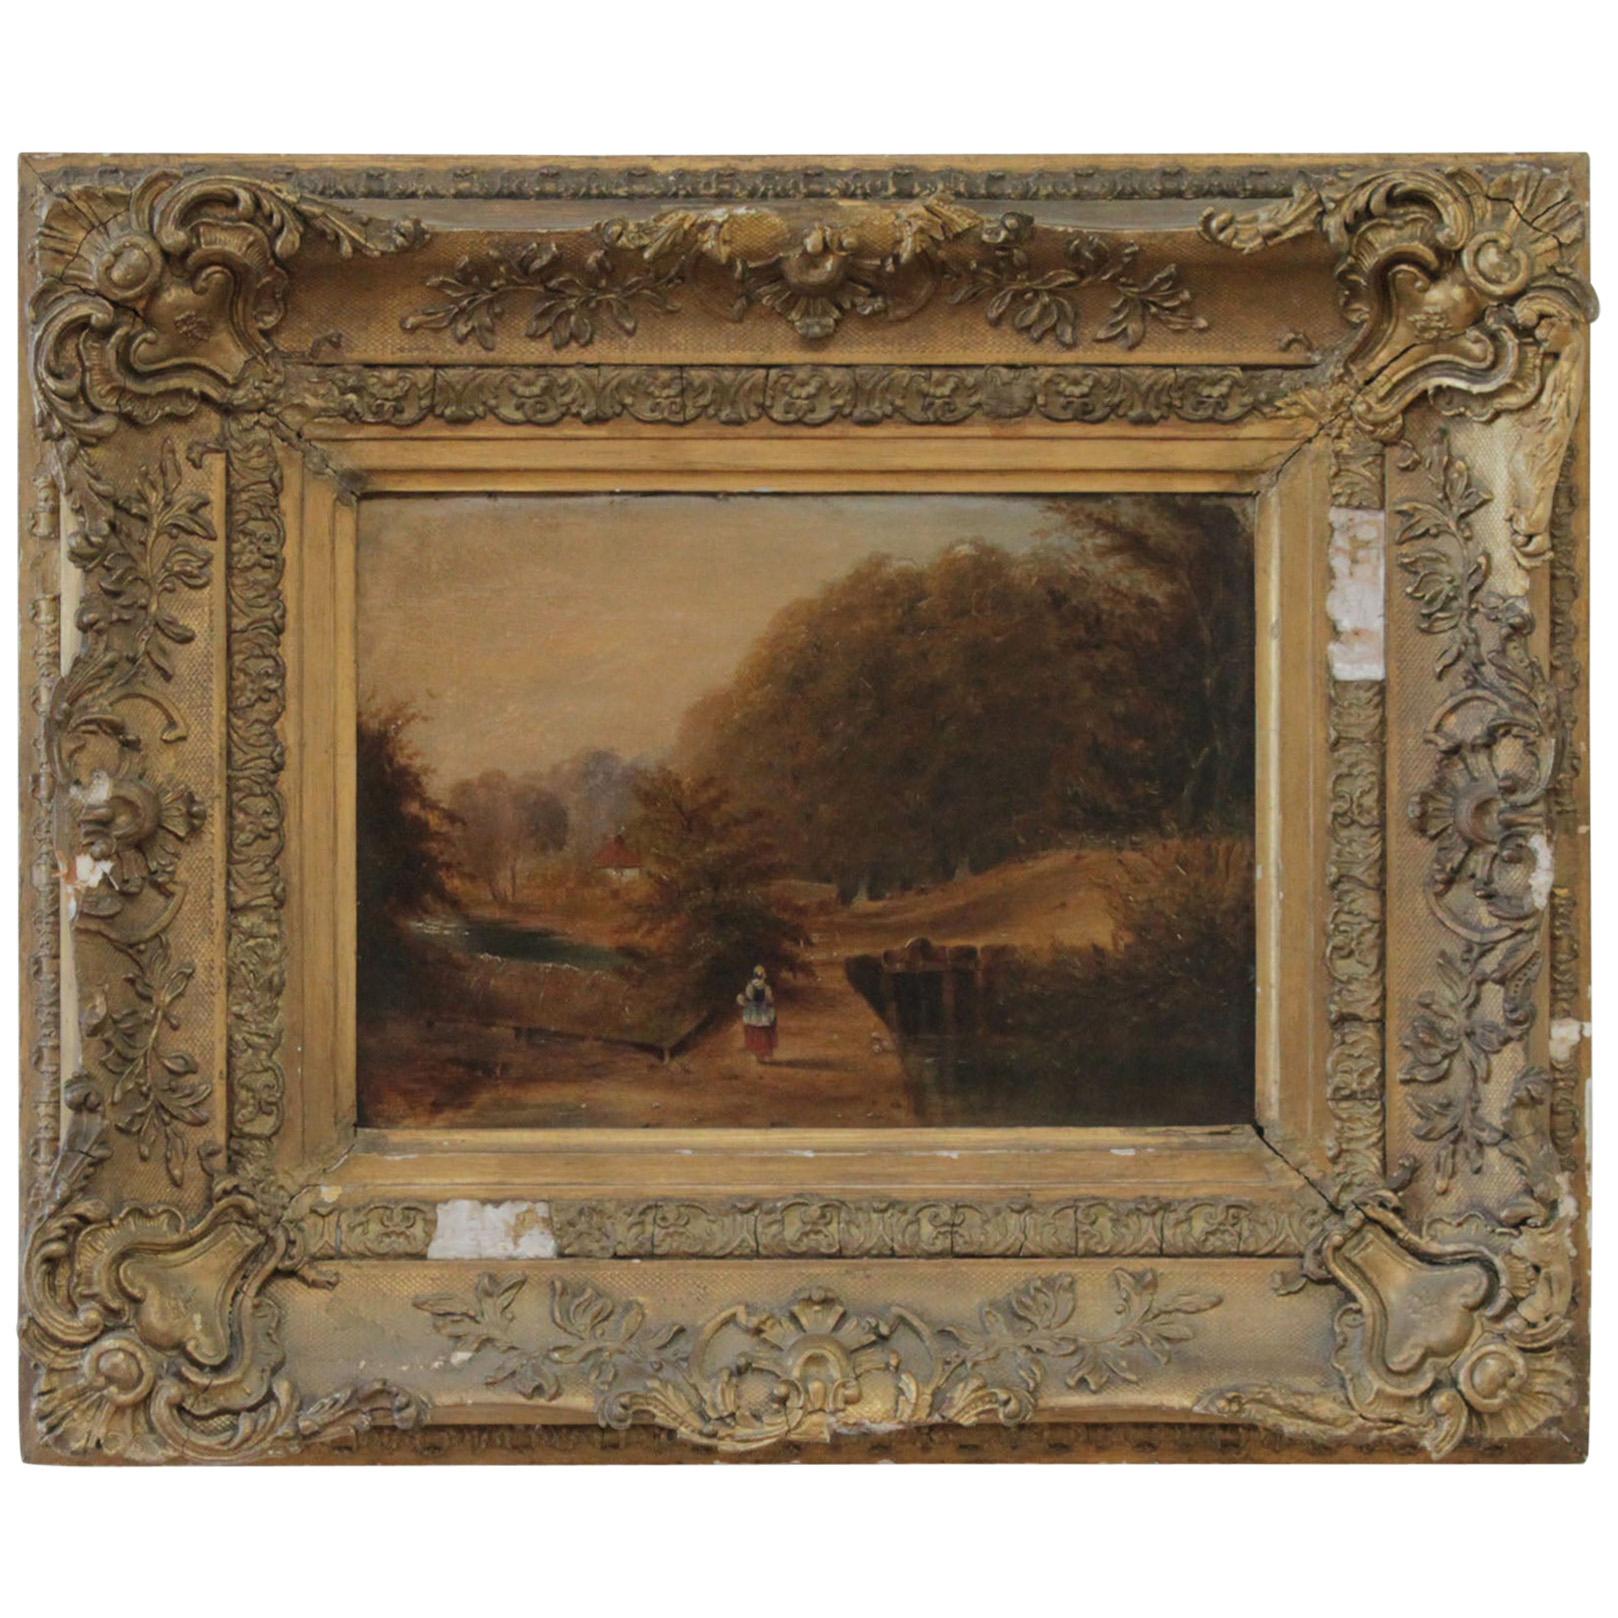 Roberson and Miller Oil on Canvas, circa 1835